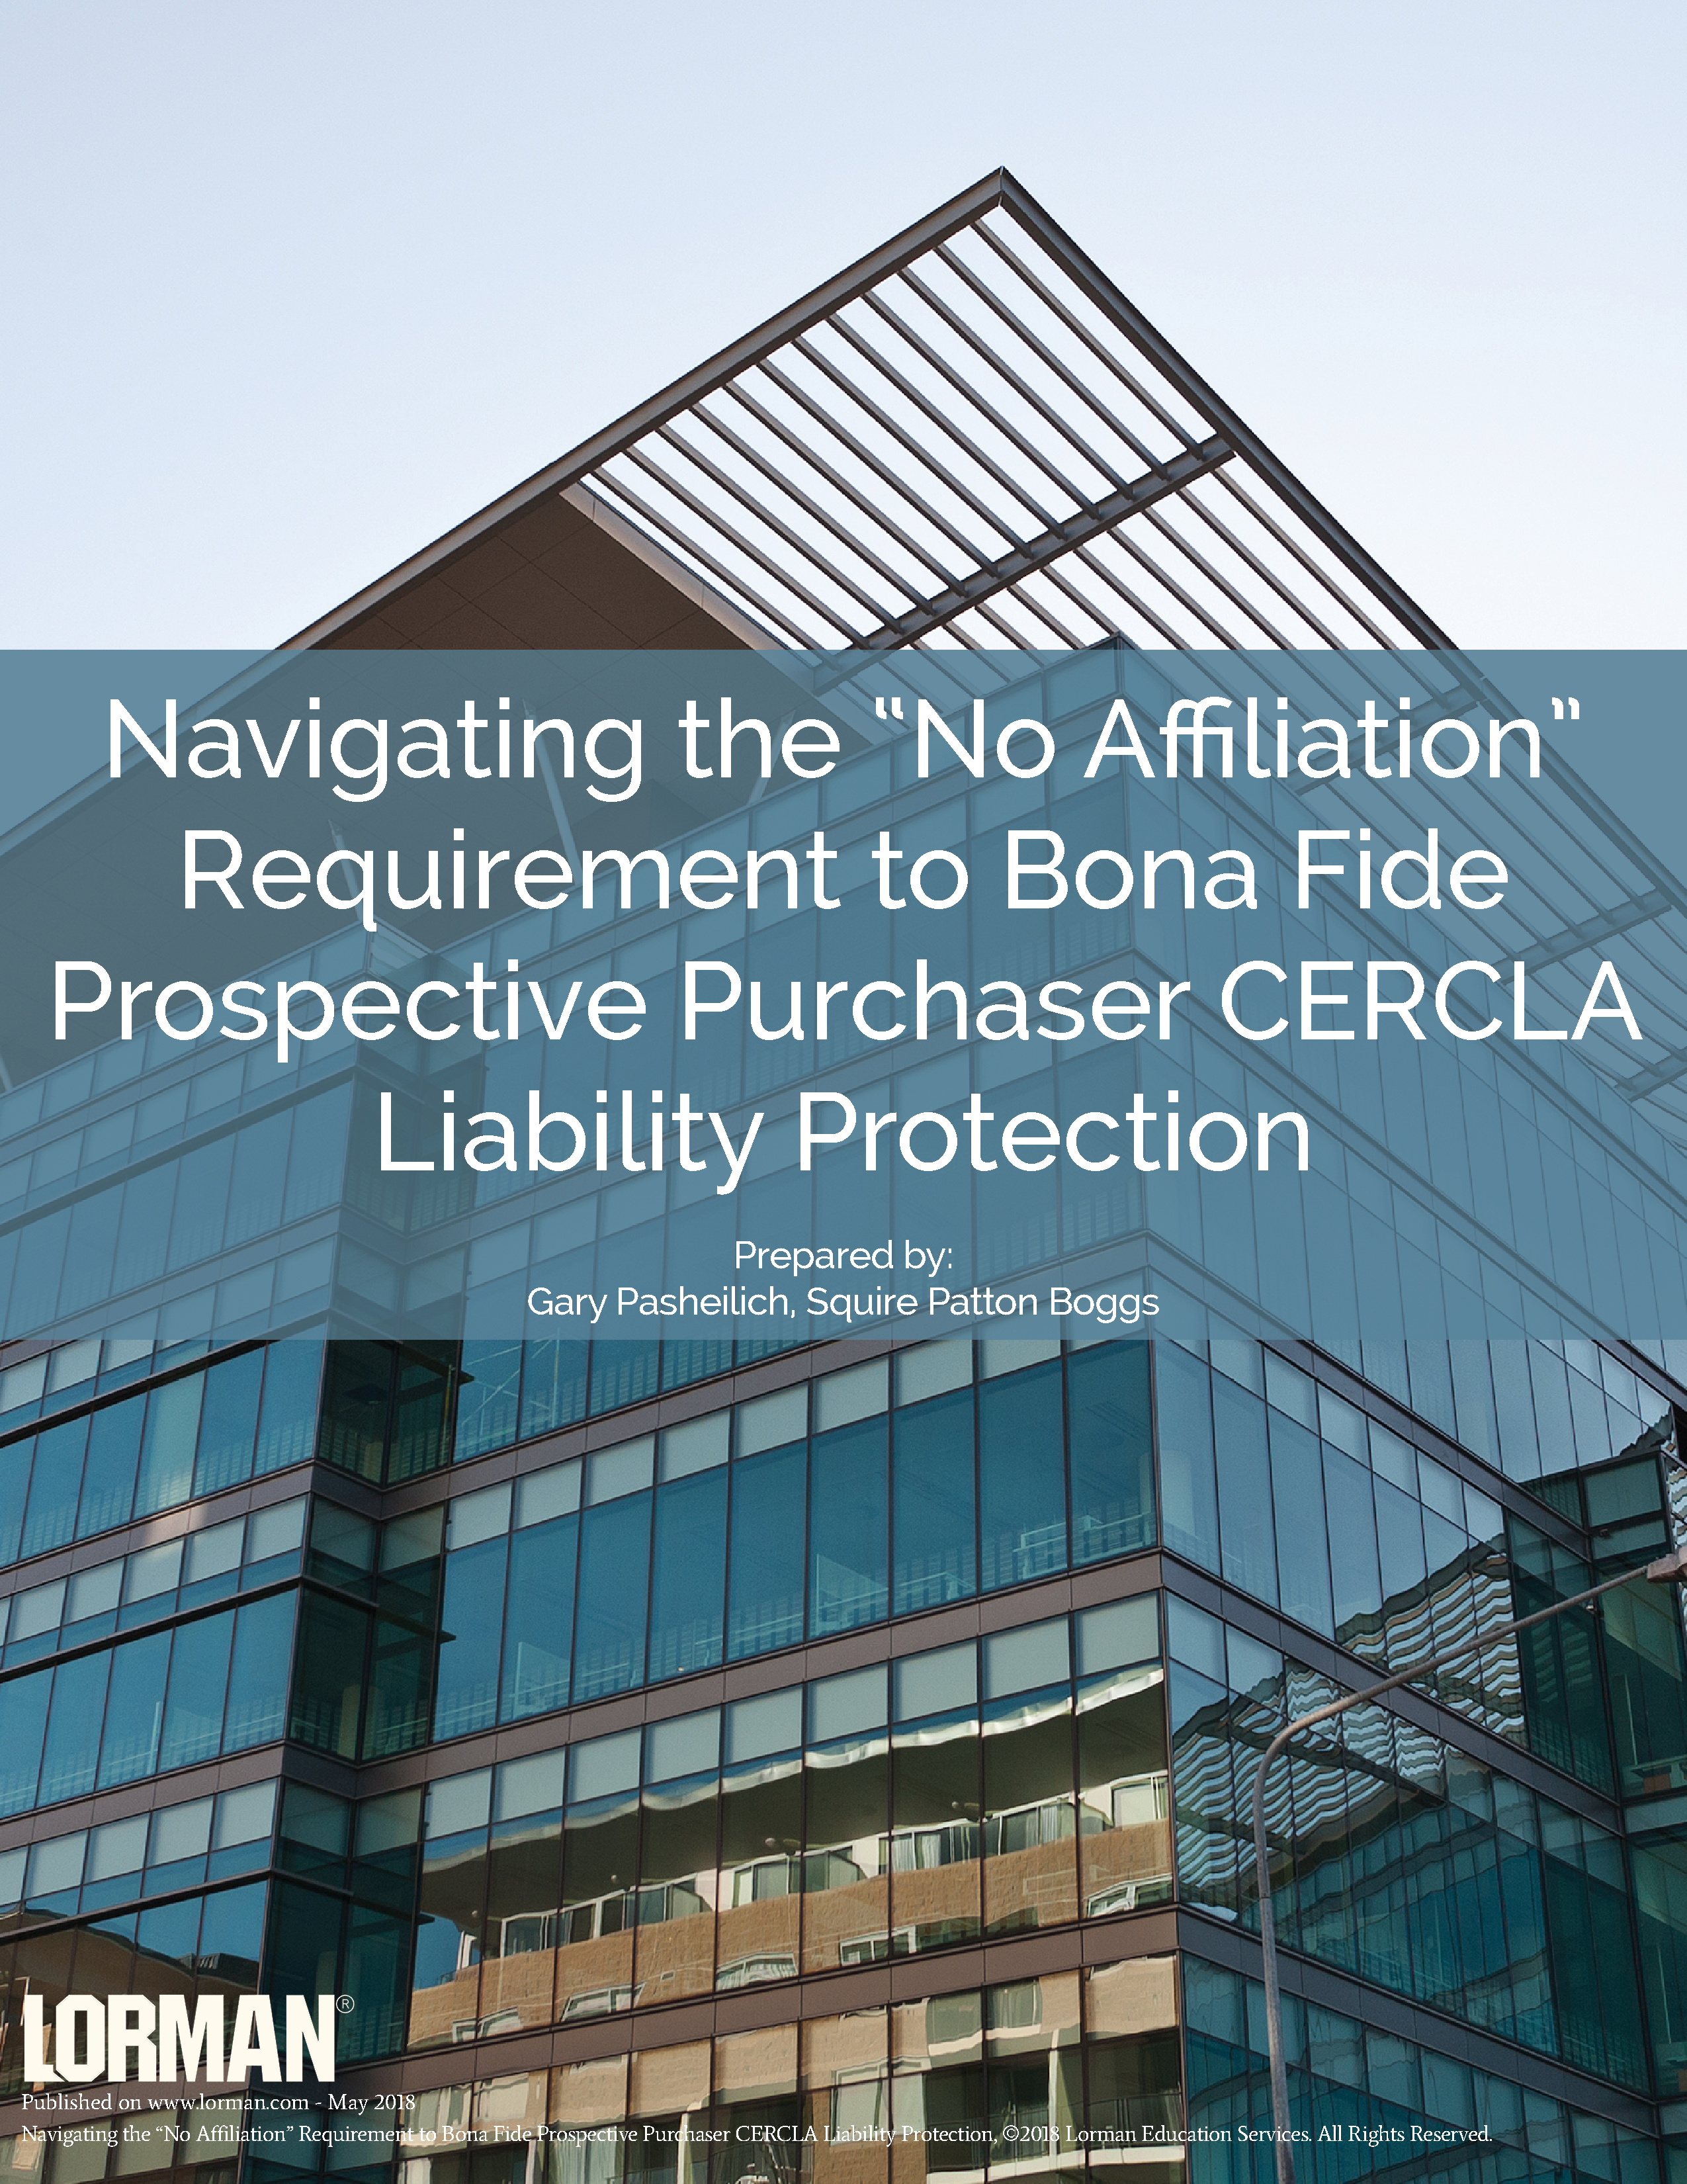 Navigating the No Affiliation Requirement to Prospective Purchaser CERCLA Liability Protection